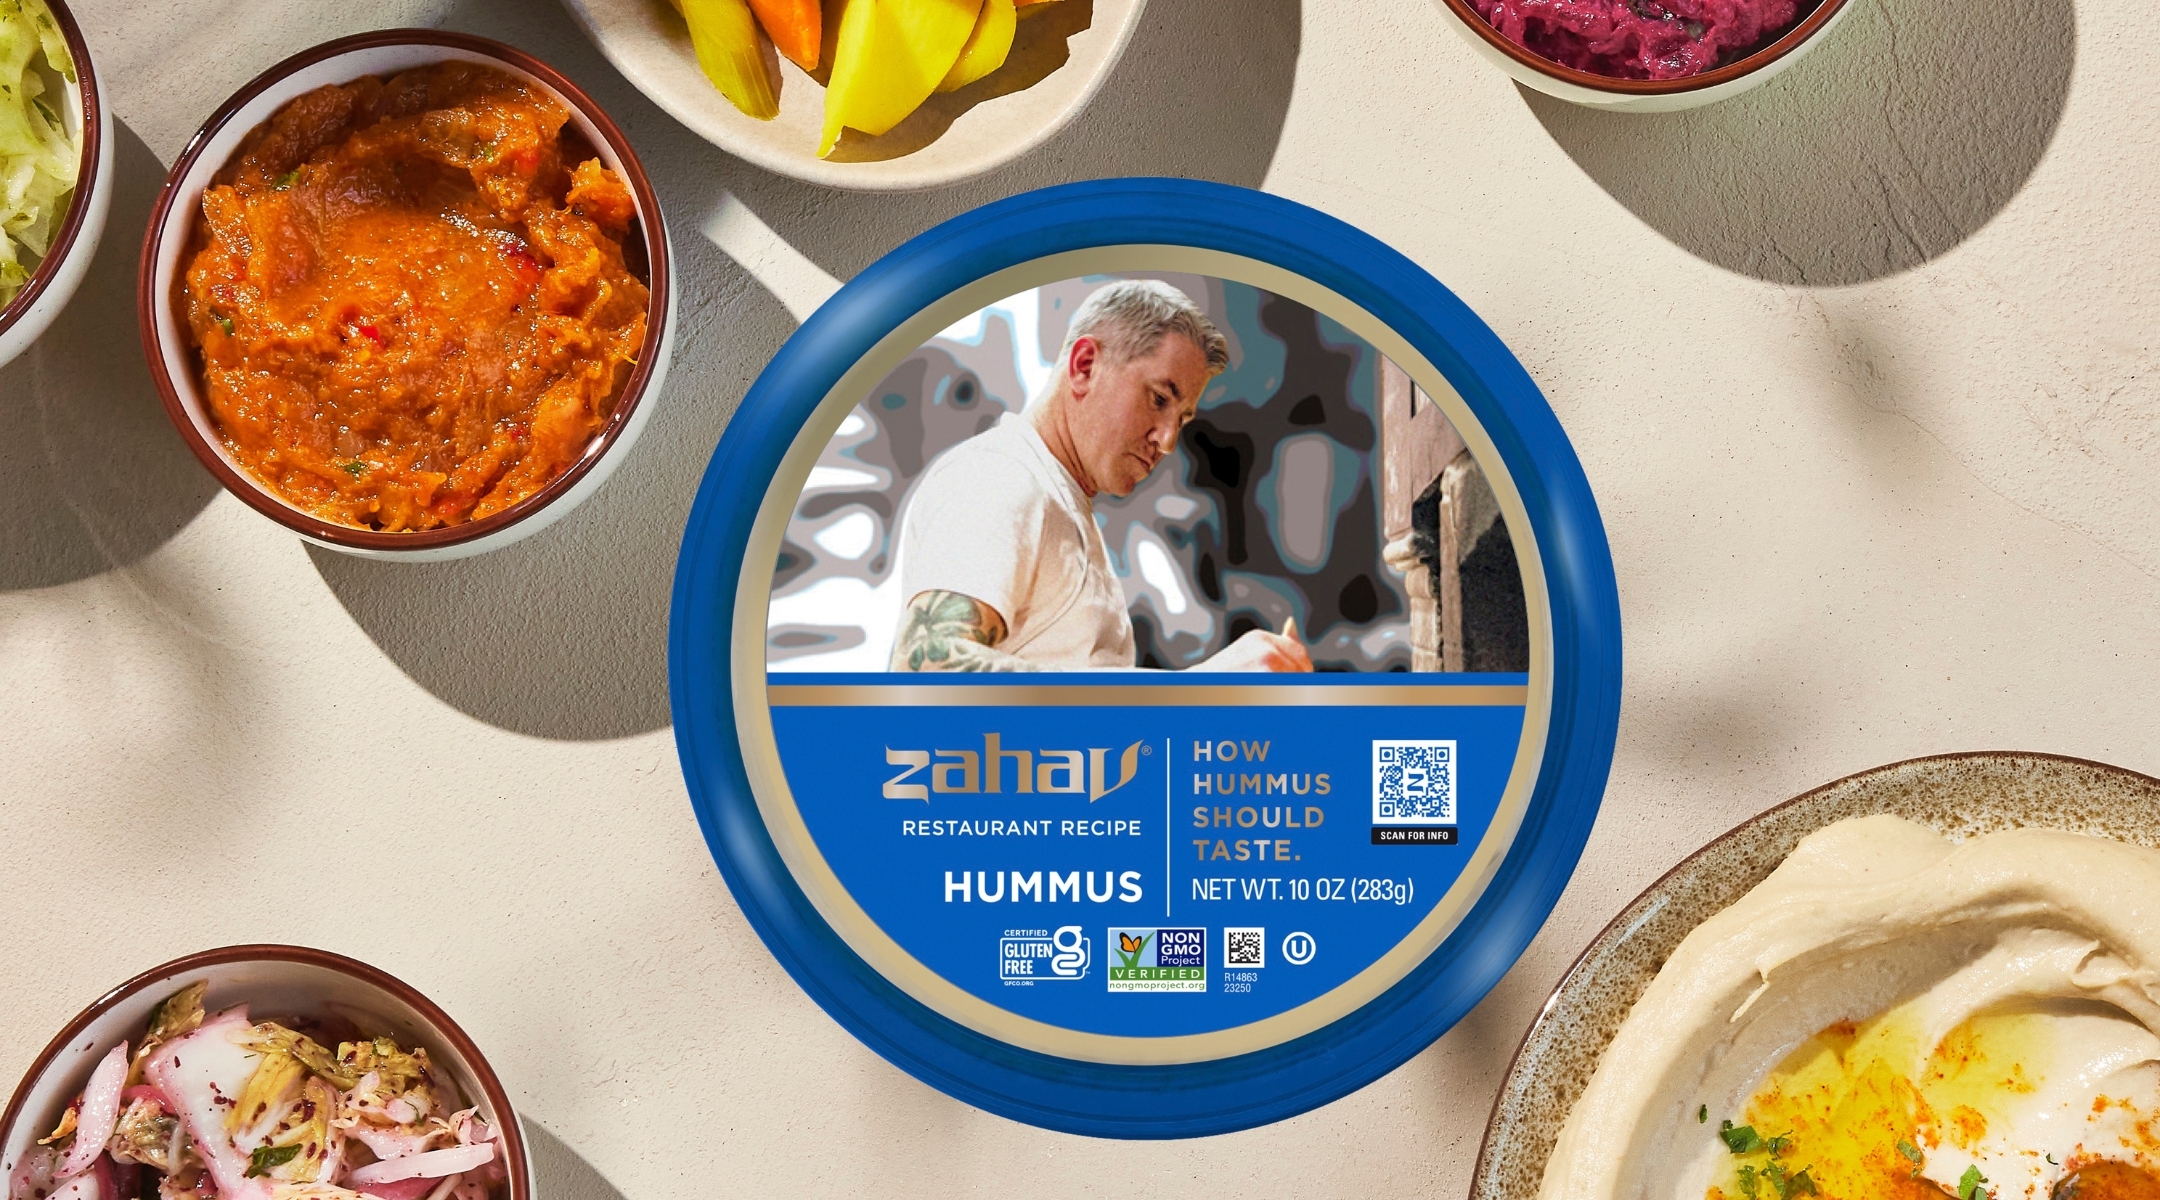 The Zahav hummus recipe, now available at 150 Whole Foods locations, contains just six ingredients: tehina, chickpeas, lemon juice, salt, cumin and garlic.(Michael Persico)